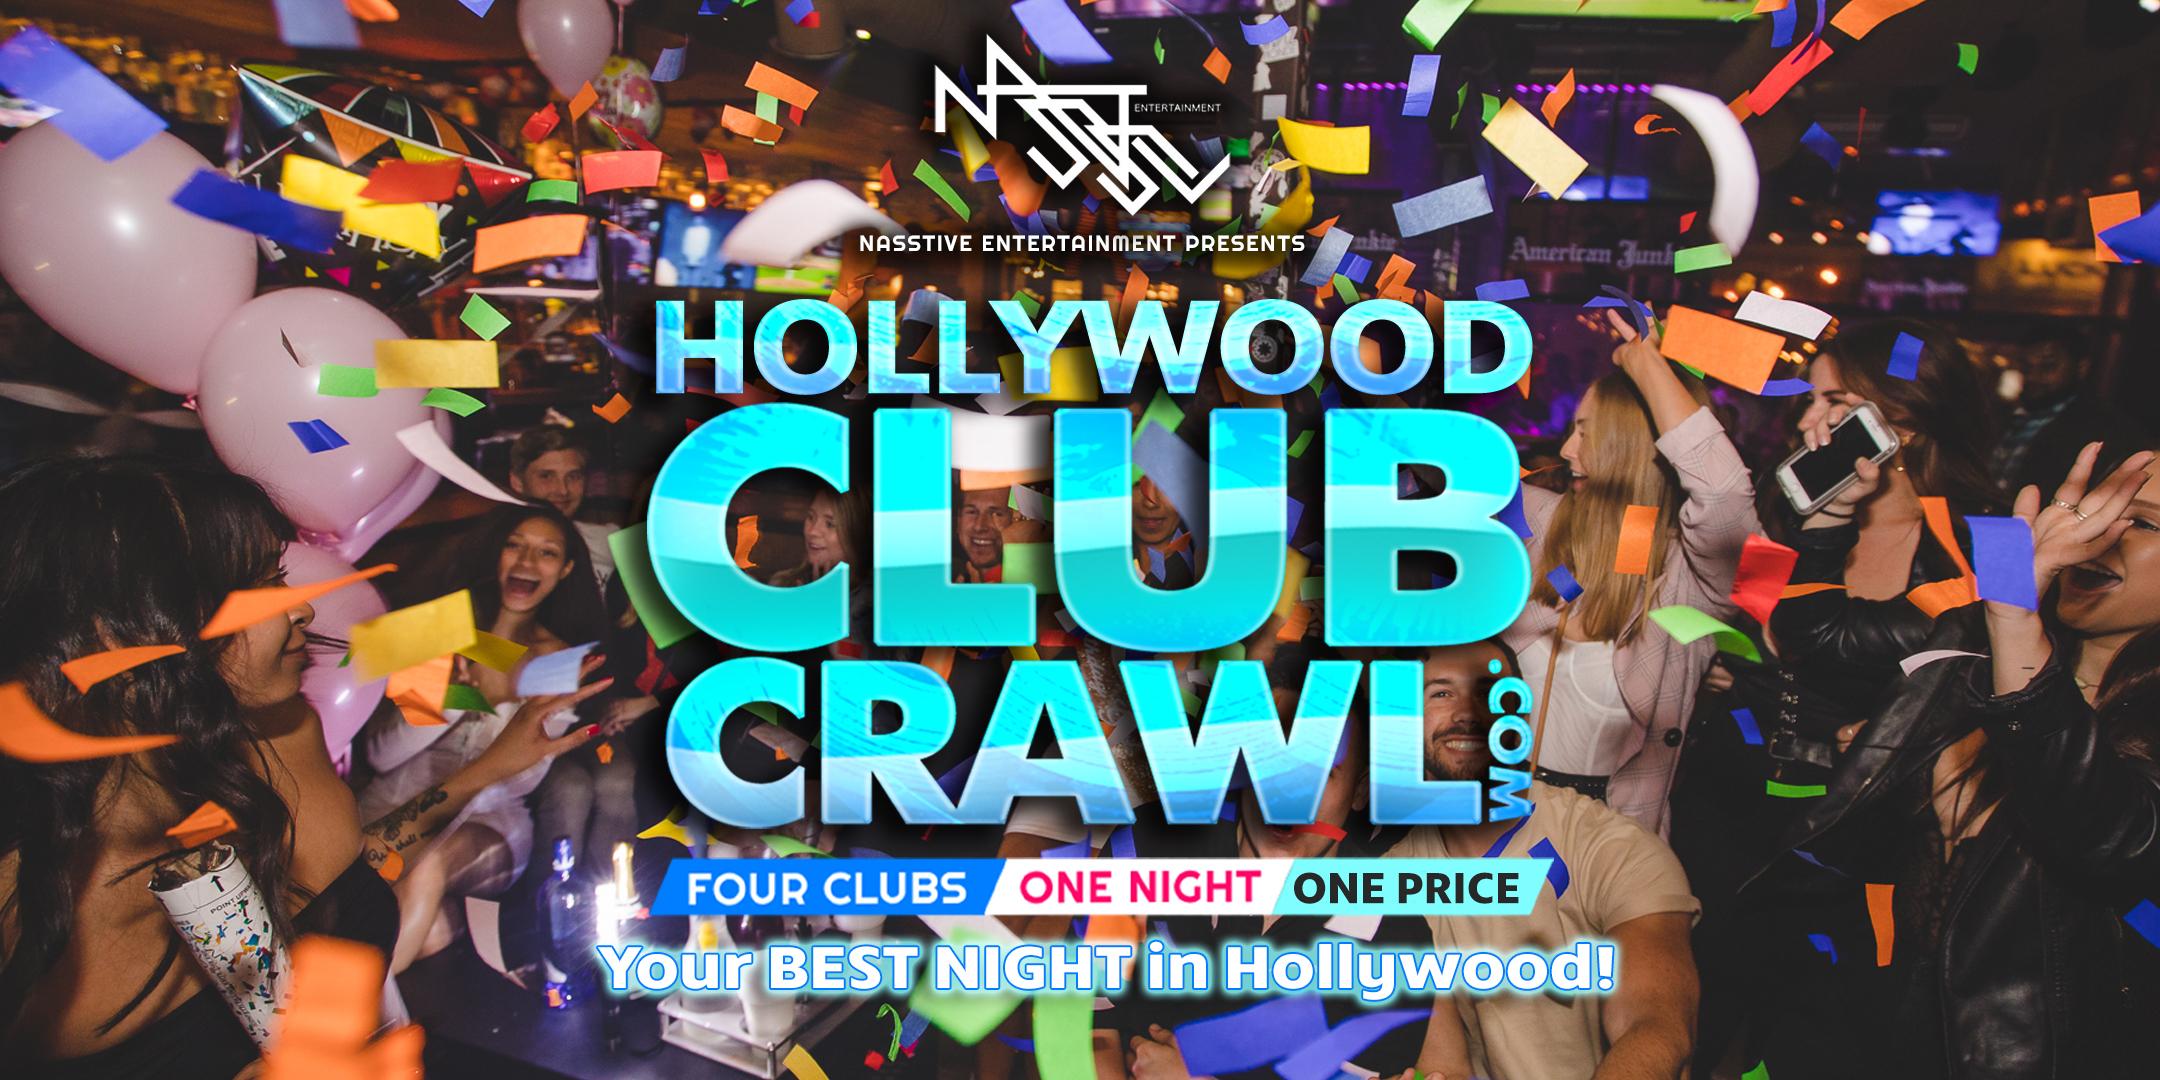 Hollywood Club Crawl - Guided party tour to 4 Hollywood nightclubs and bars